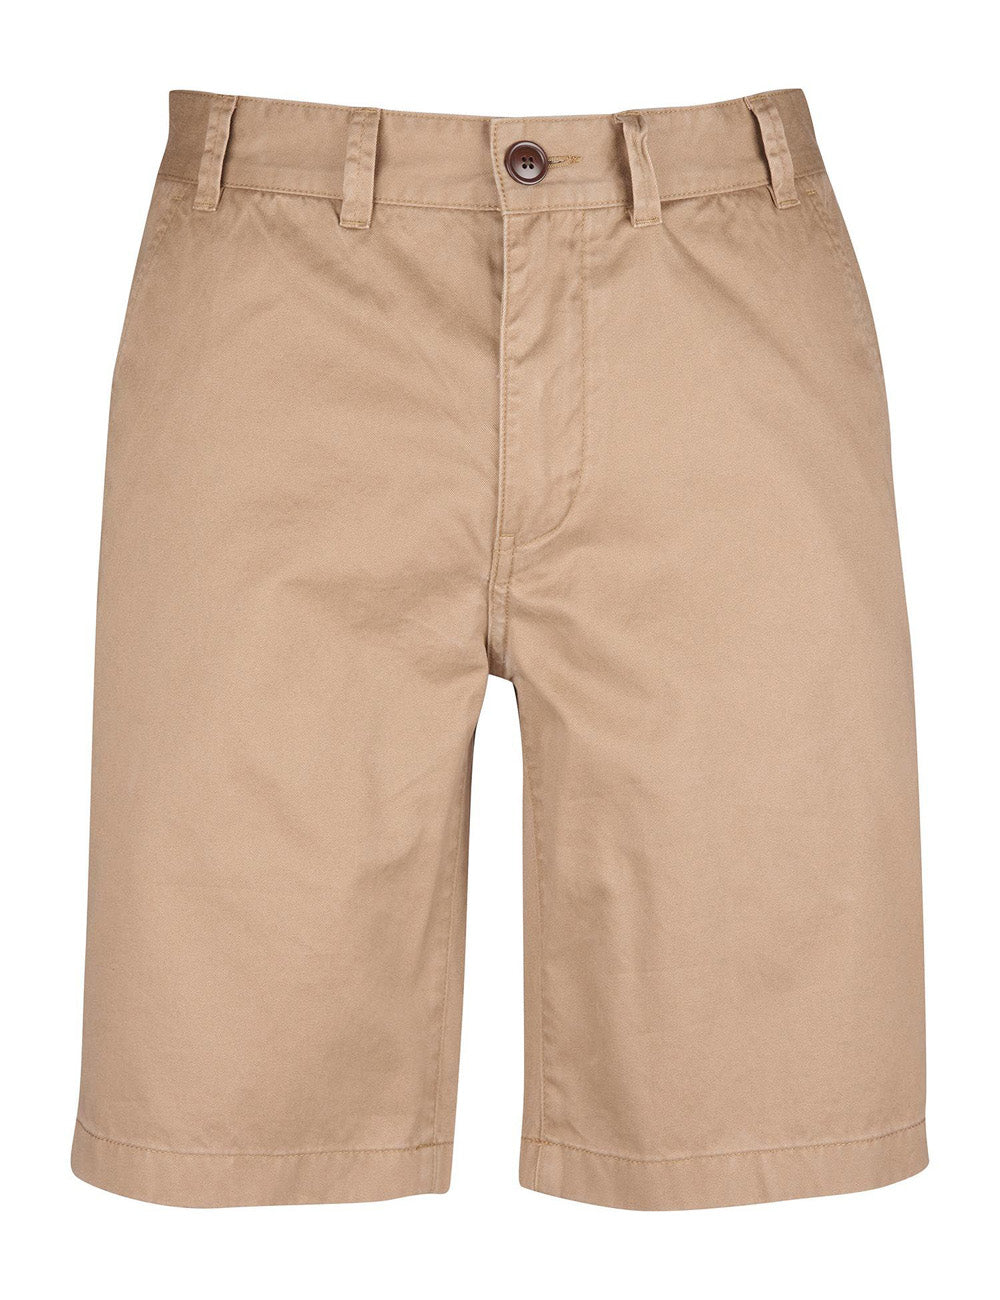 Barbour's Neuston City Shorts in Stone on a white background